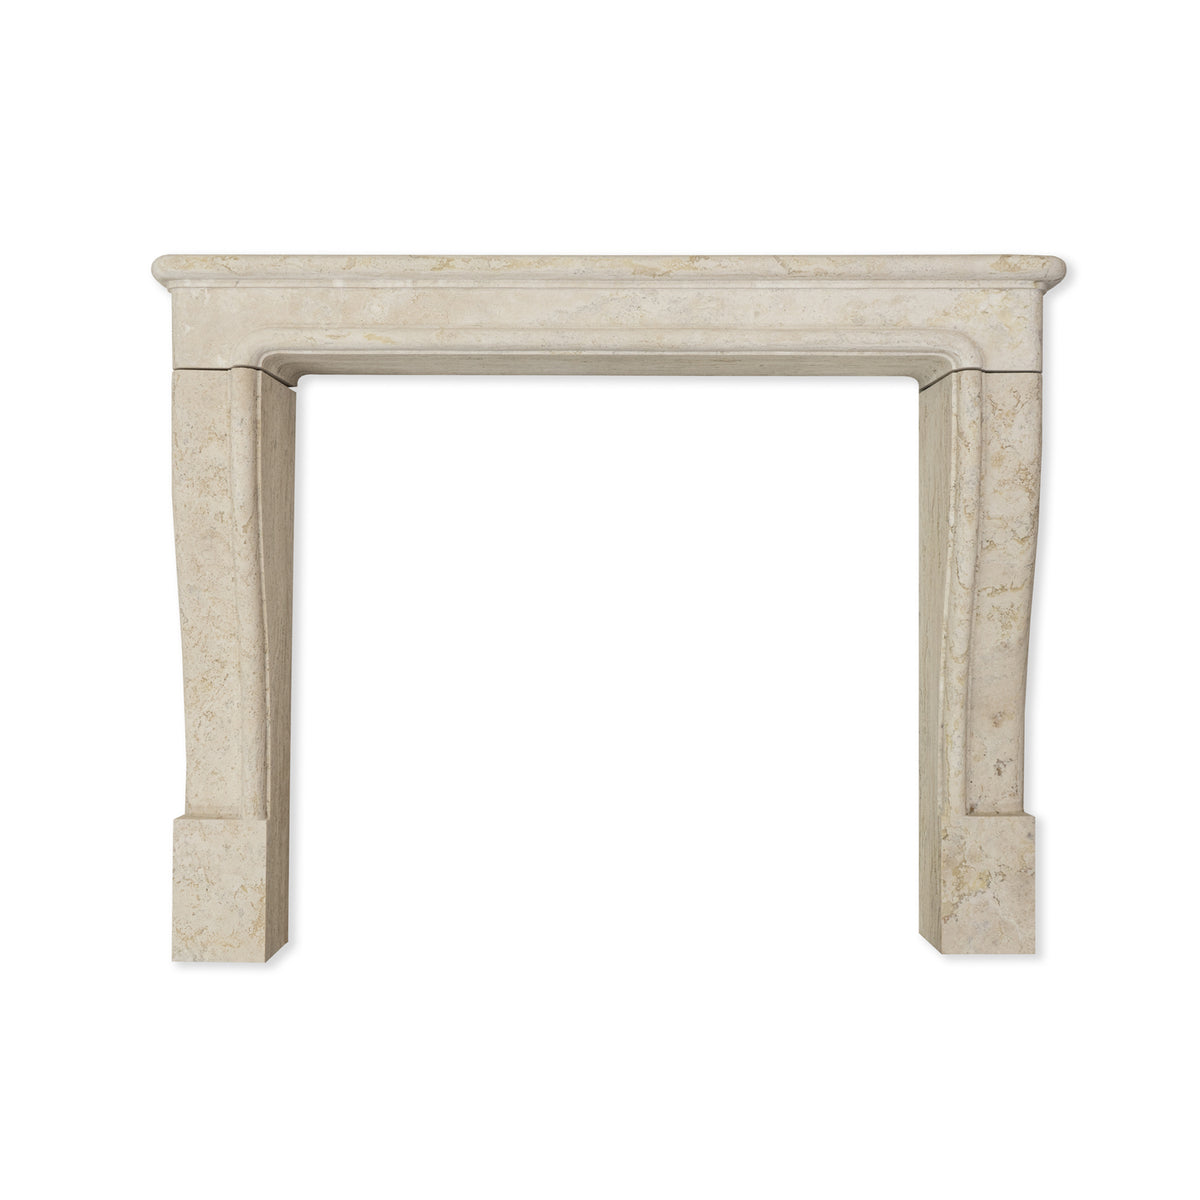 Hobson Fireplace in Maderno Travertine with Honed Finish Fullscreen Image View